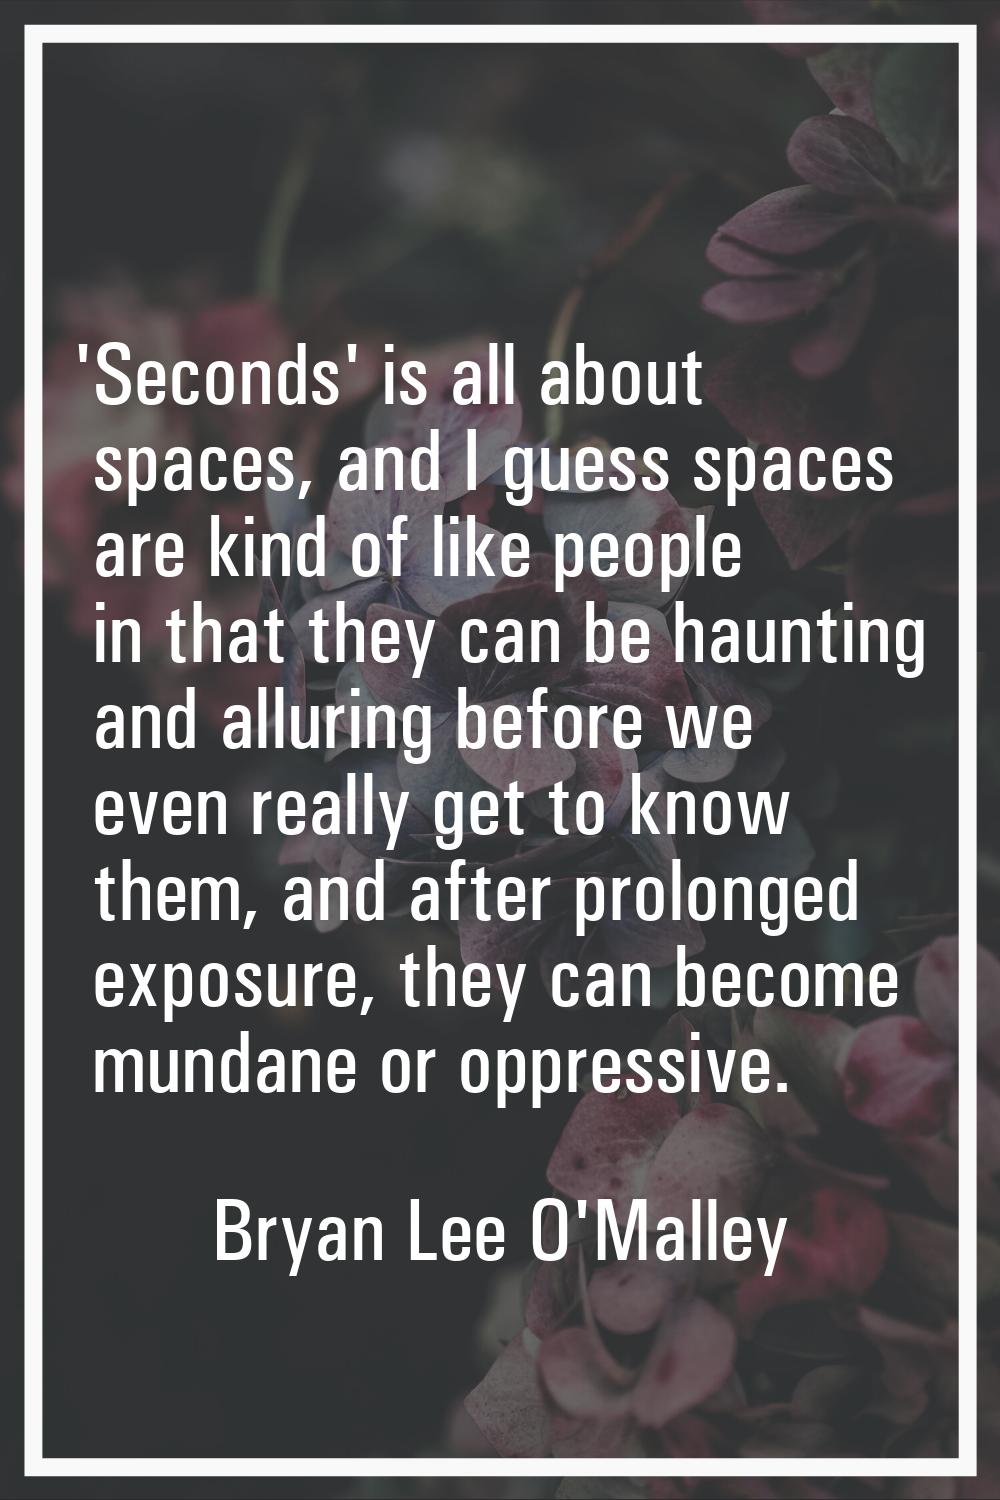 'Seconds' is all about spaces, and I guess spaces are kind of like people in that they can be haunt